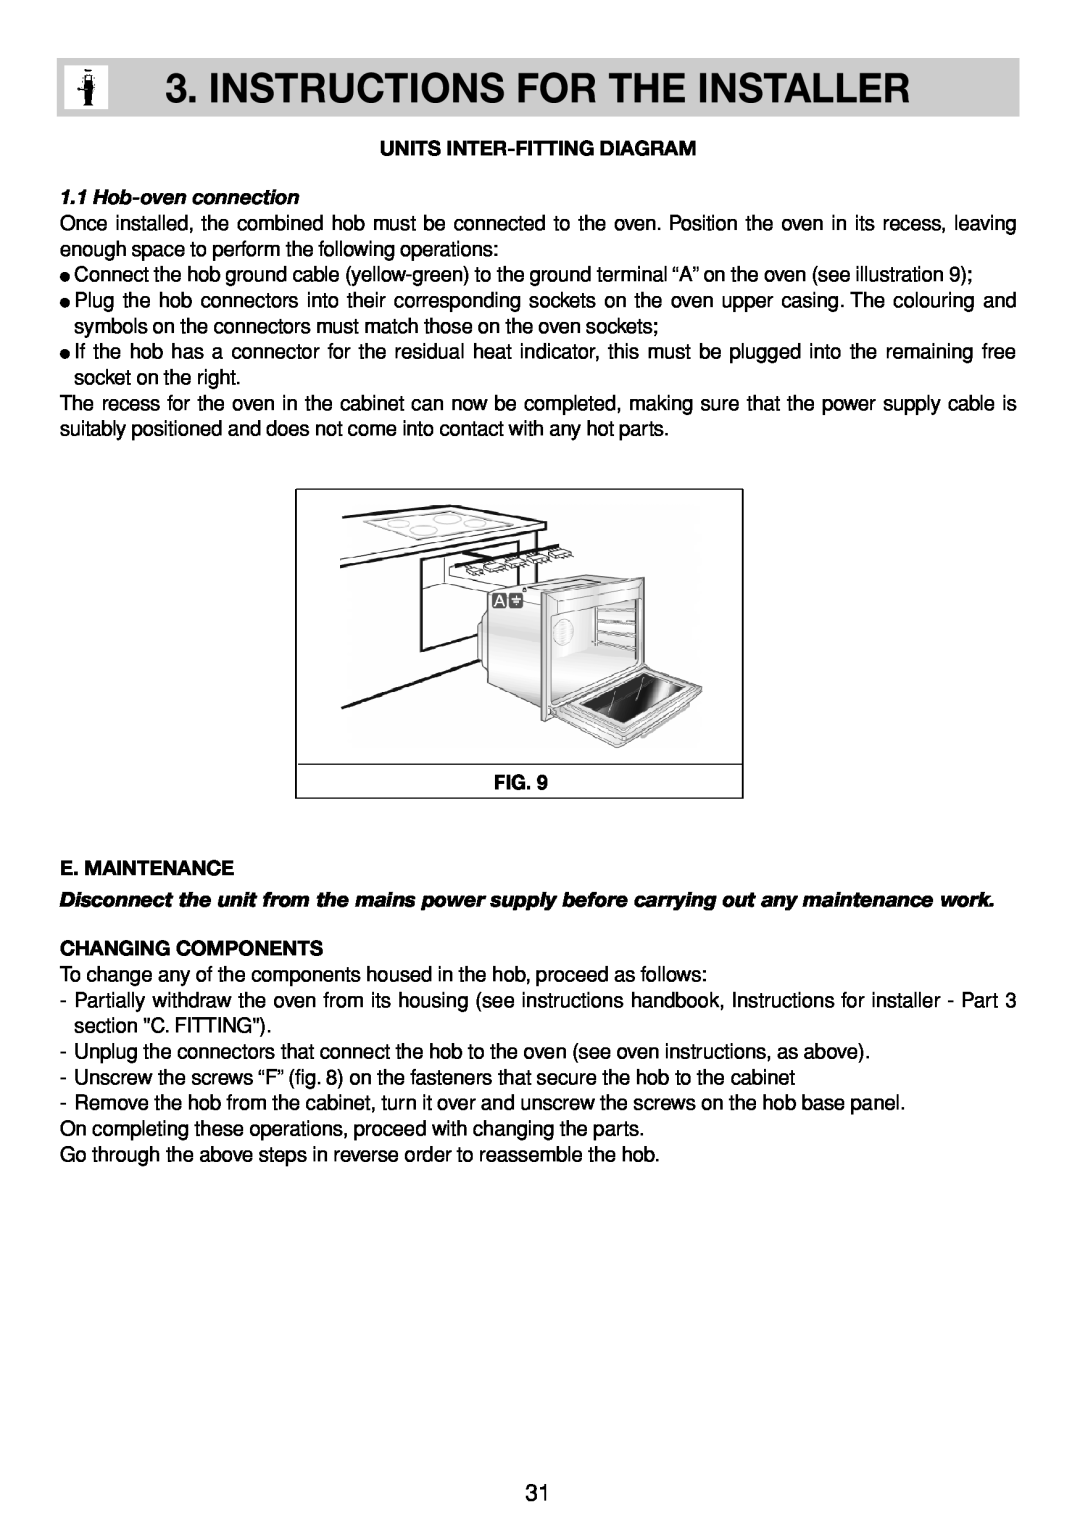 Smeg SE035 Units Inter-Fittingdiagram, Fig. E. Maintenance, Changing Components, Instructions For The Installer 